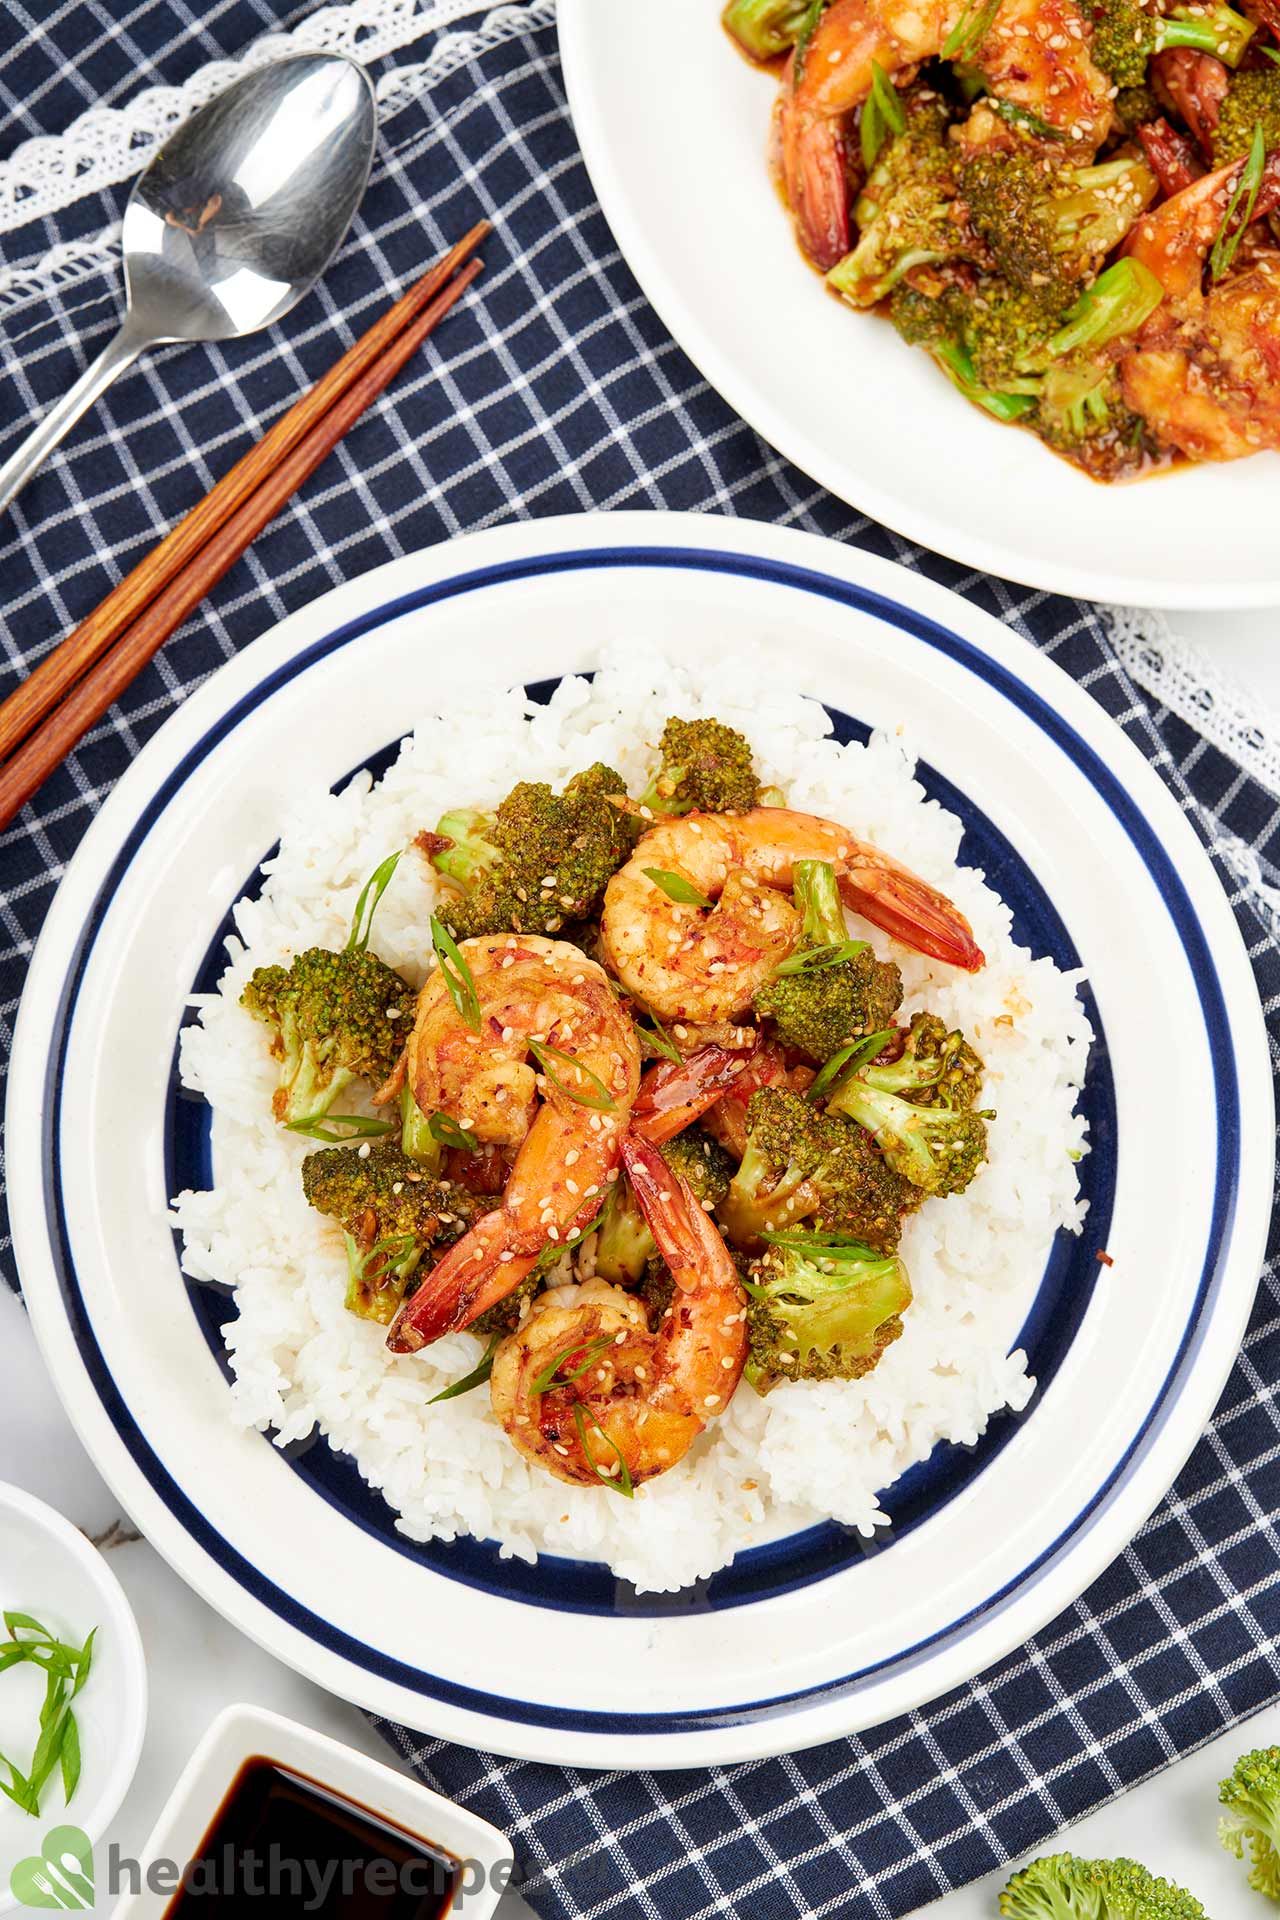 Can I Use Frozen Shrimp for Shrimp And Broccoli